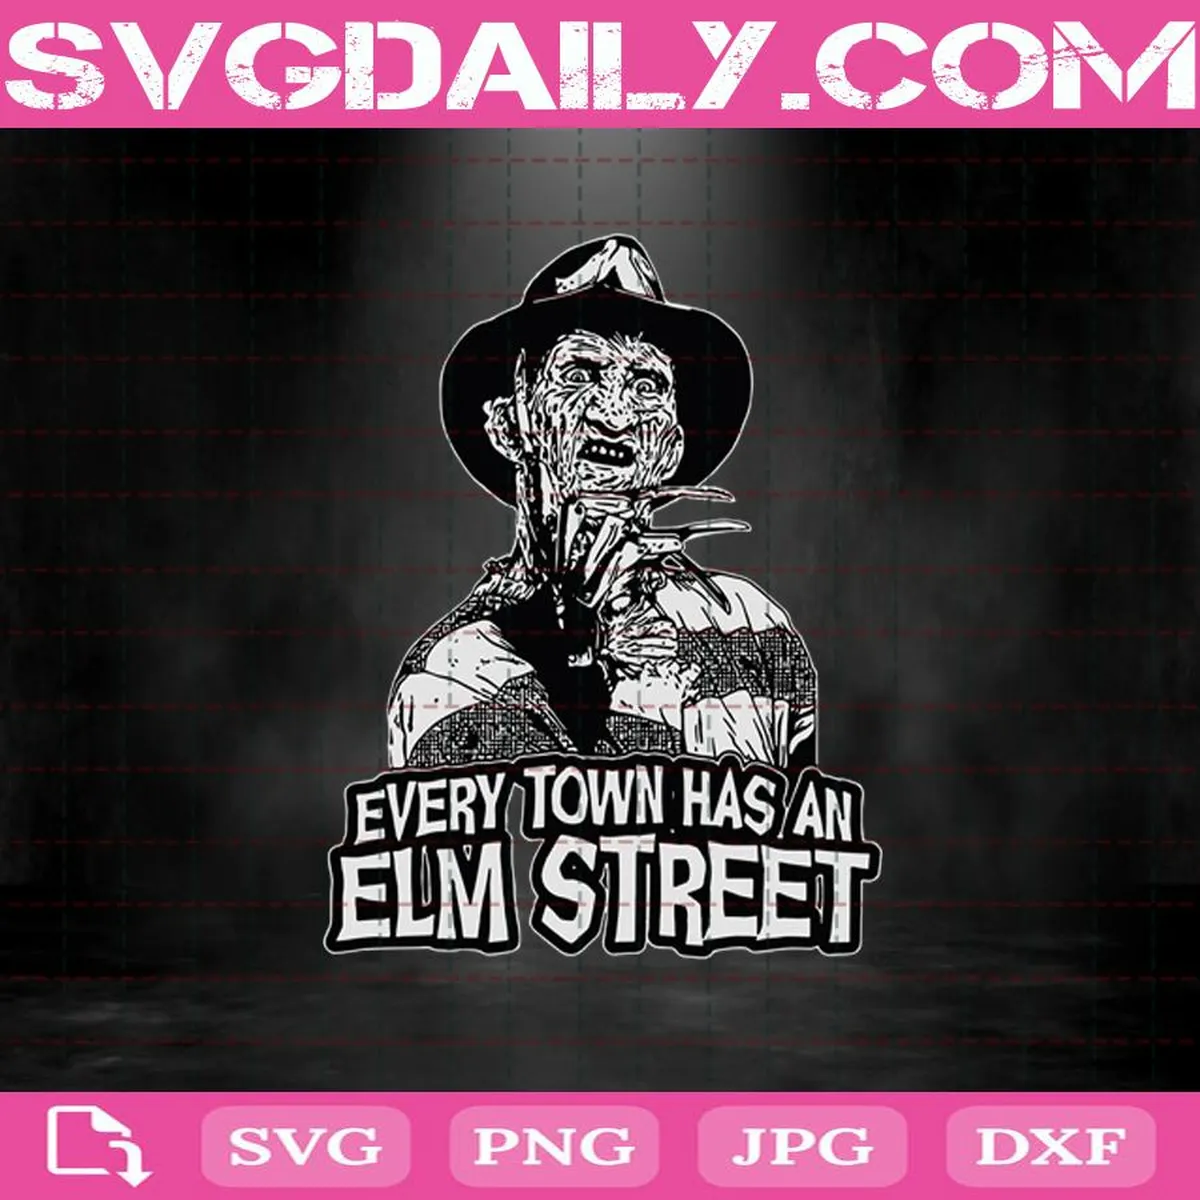 Freddy Krueger Every Town Has An Elm Street Svg, Horror Movies Svg, Halloween Svg Dxf Png Eps Cutting Cut File Silhouette Cricut